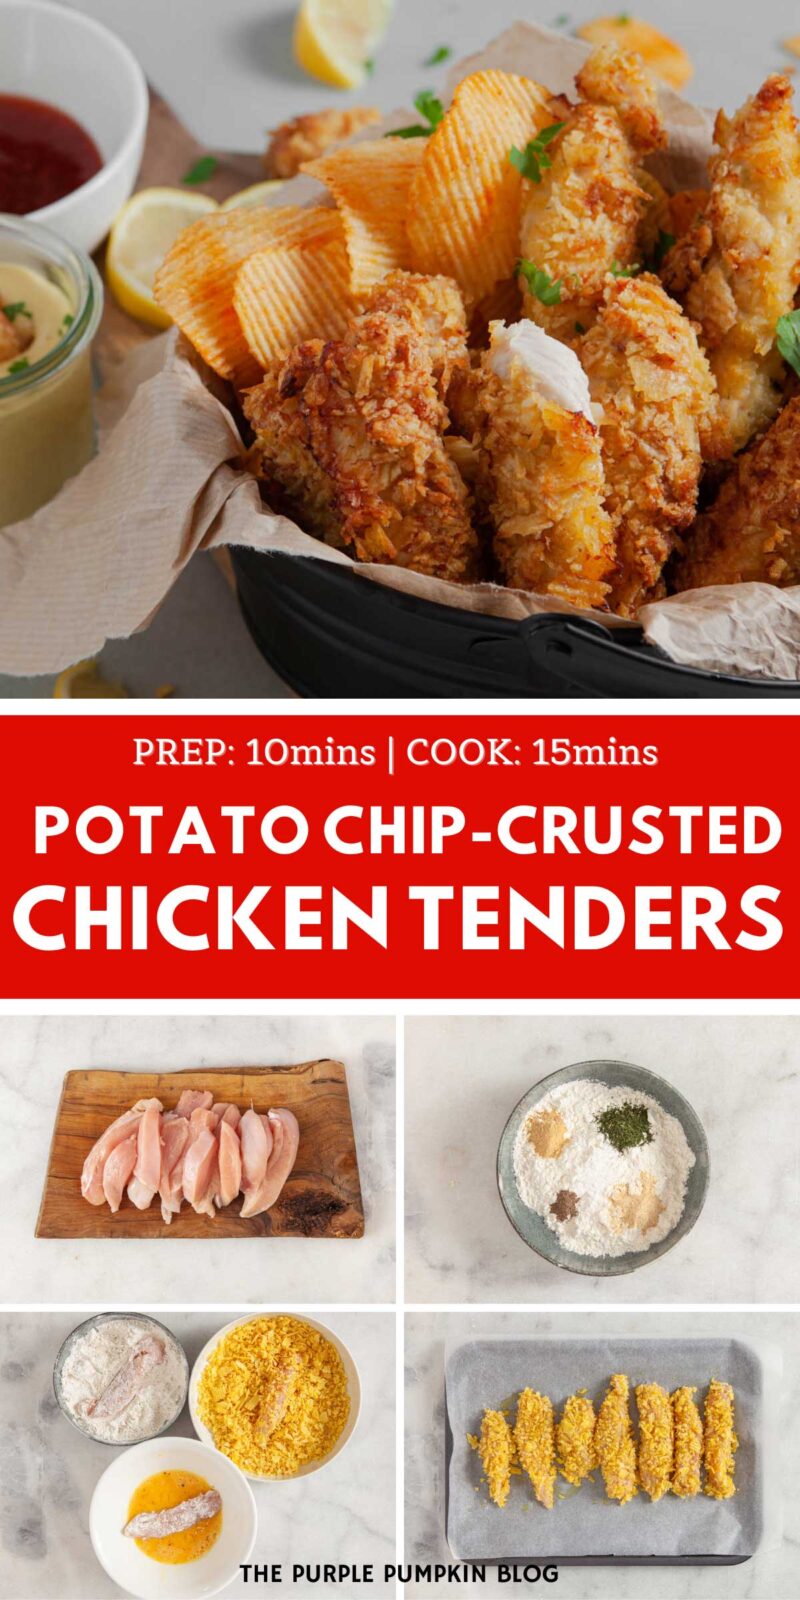 Potato Chip-Crusted Chicken Tenders